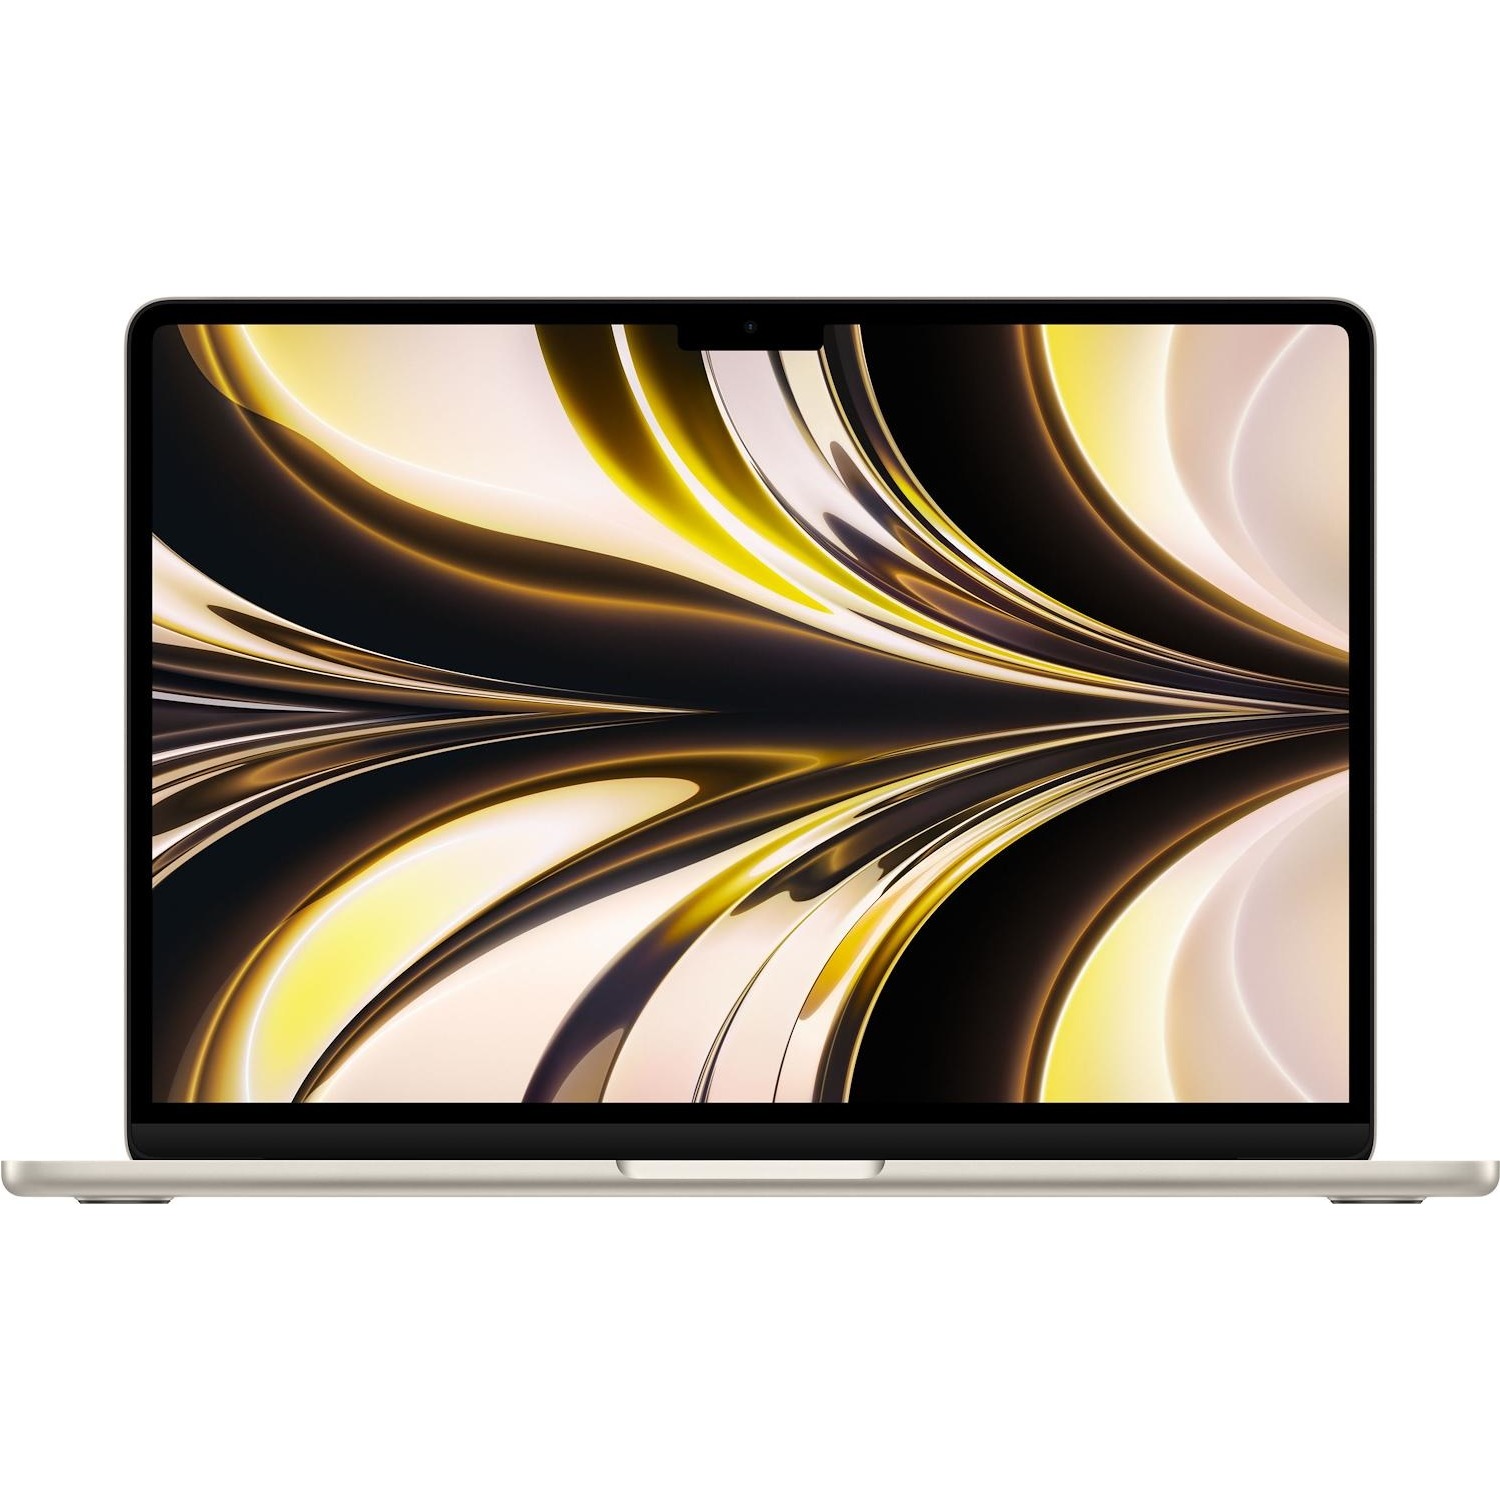 Image of Apple MacBook Air 13-inch : M2 chip with 8-core CPU and 8-core GPU, 256GB - Starlight - (APL MLY13T/A MACBOOK AIR 13 M2 256 STR)